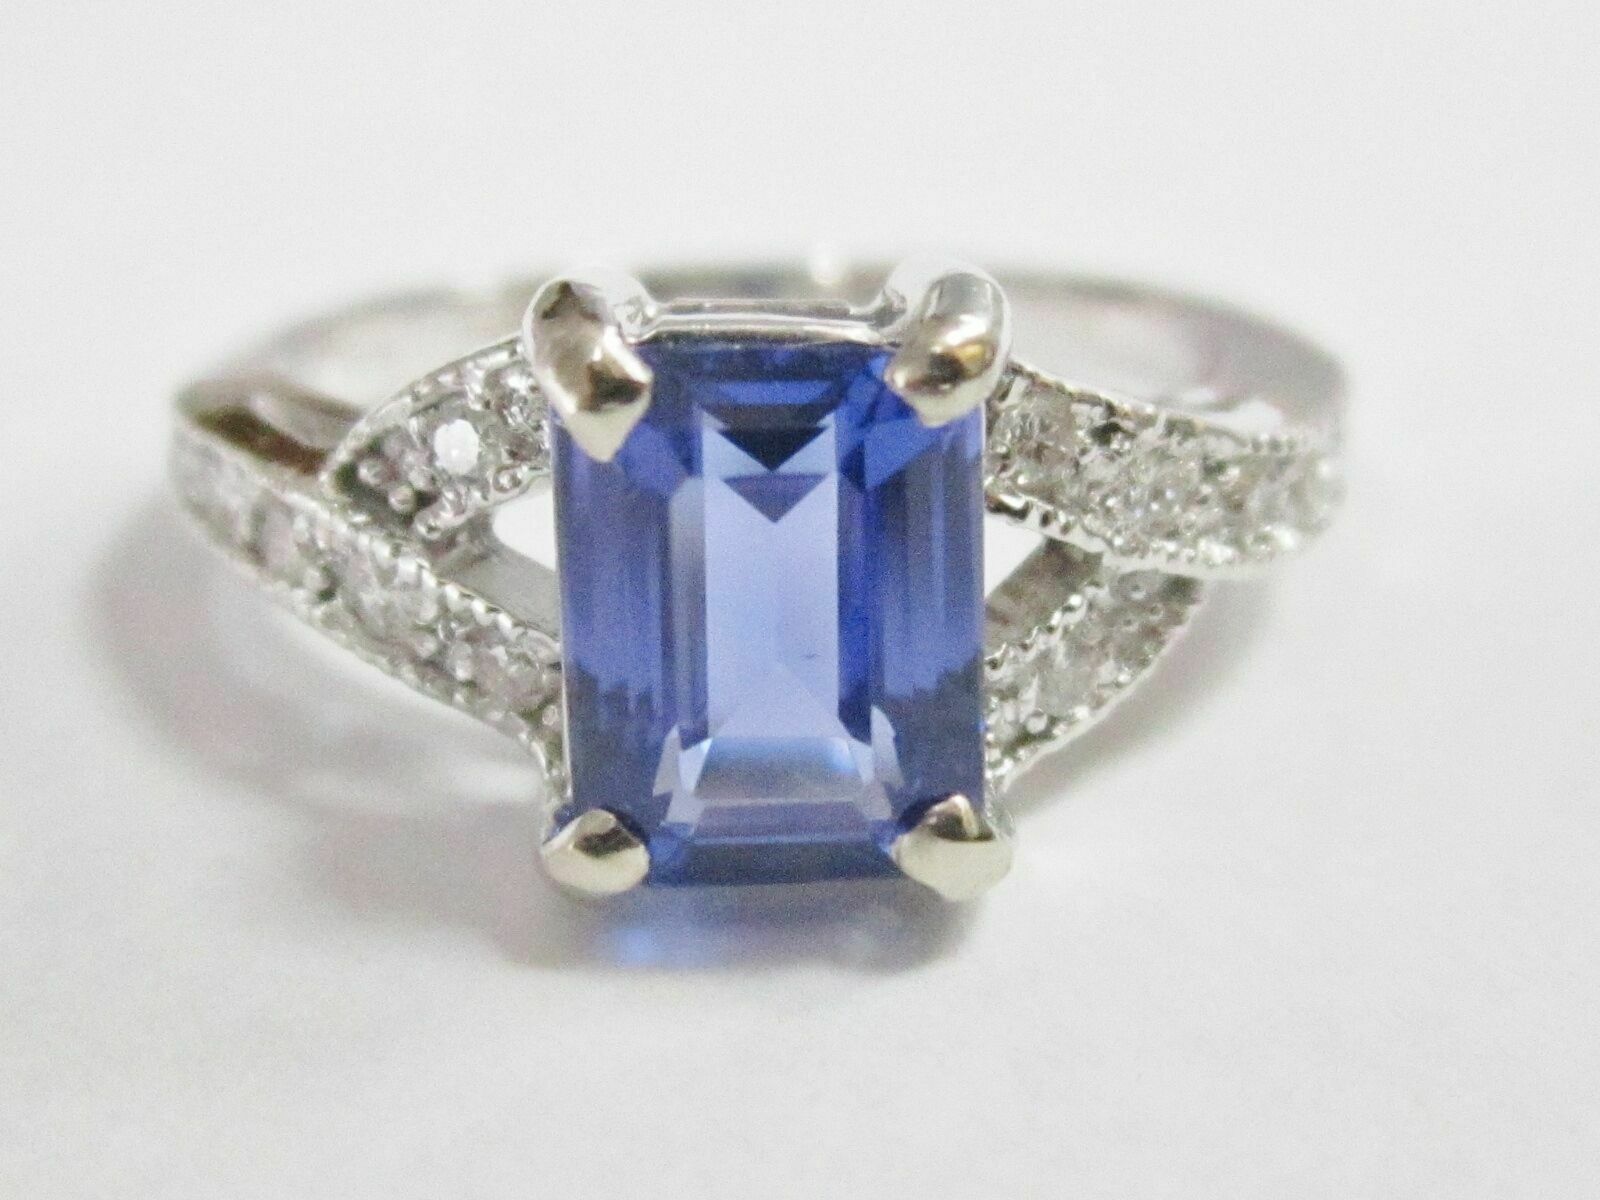 1.91 TCW Natural Radiant Tanzanite & Diamond Accents Solitaire Ring Size 6.5 14k